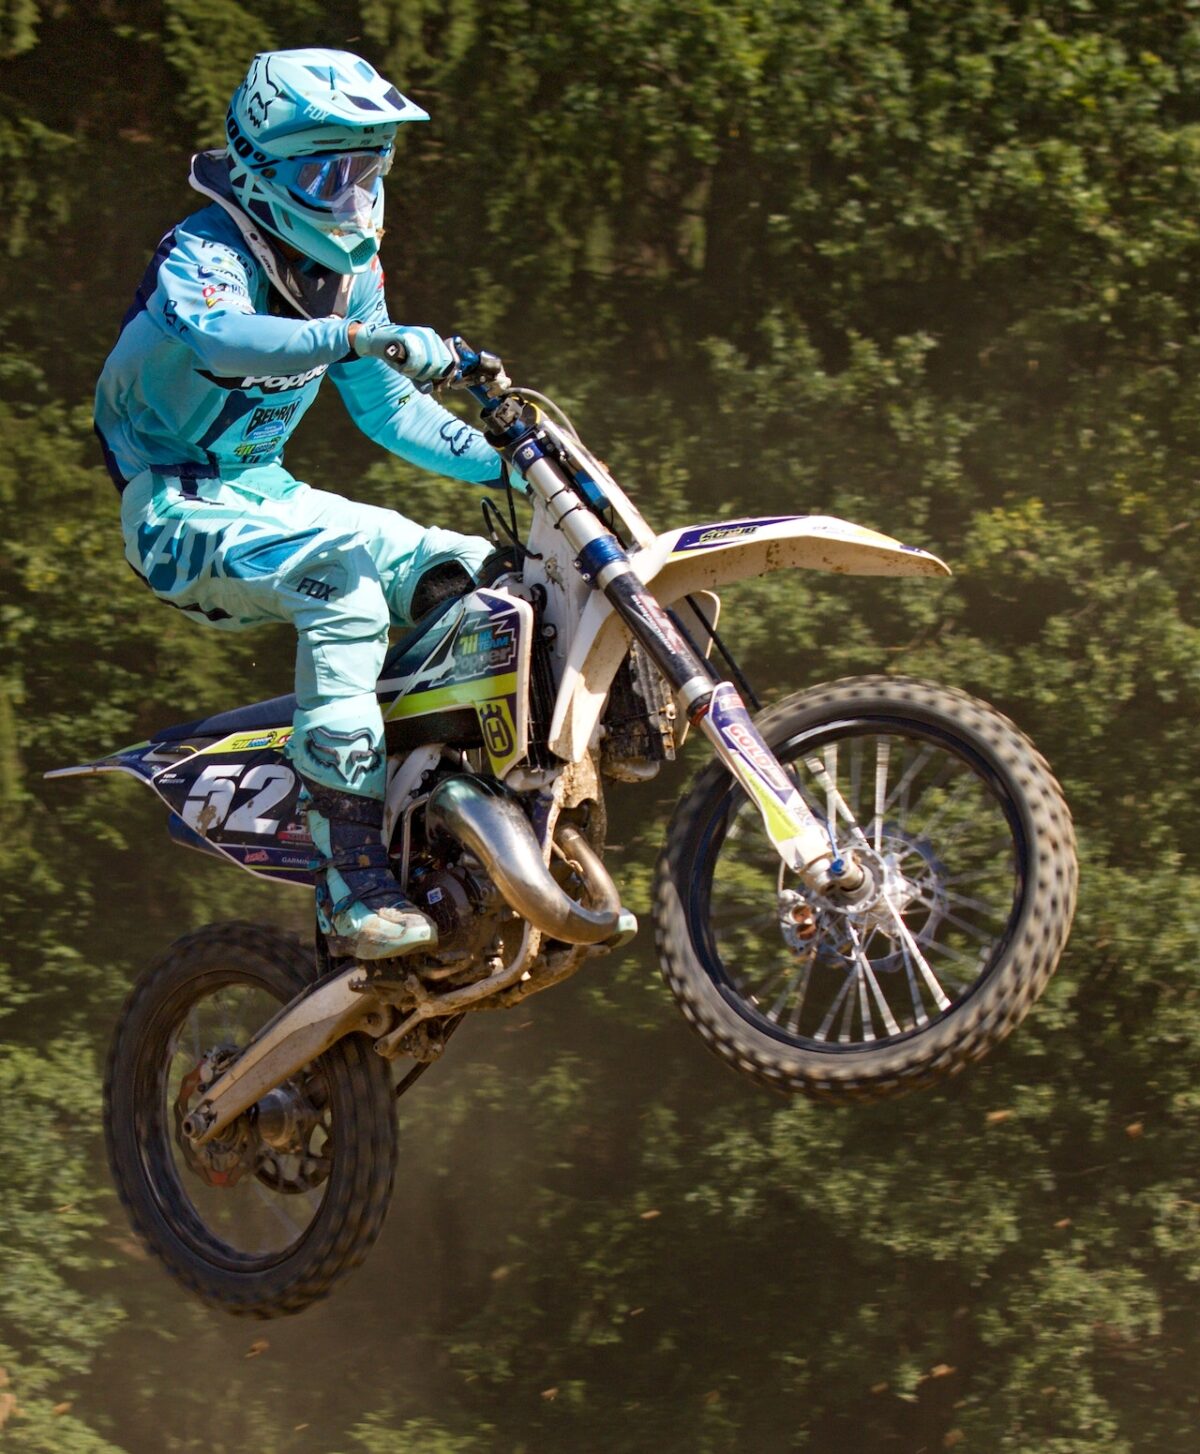 High Quality Neck Braces in Motocross Riding: Protect your neck!